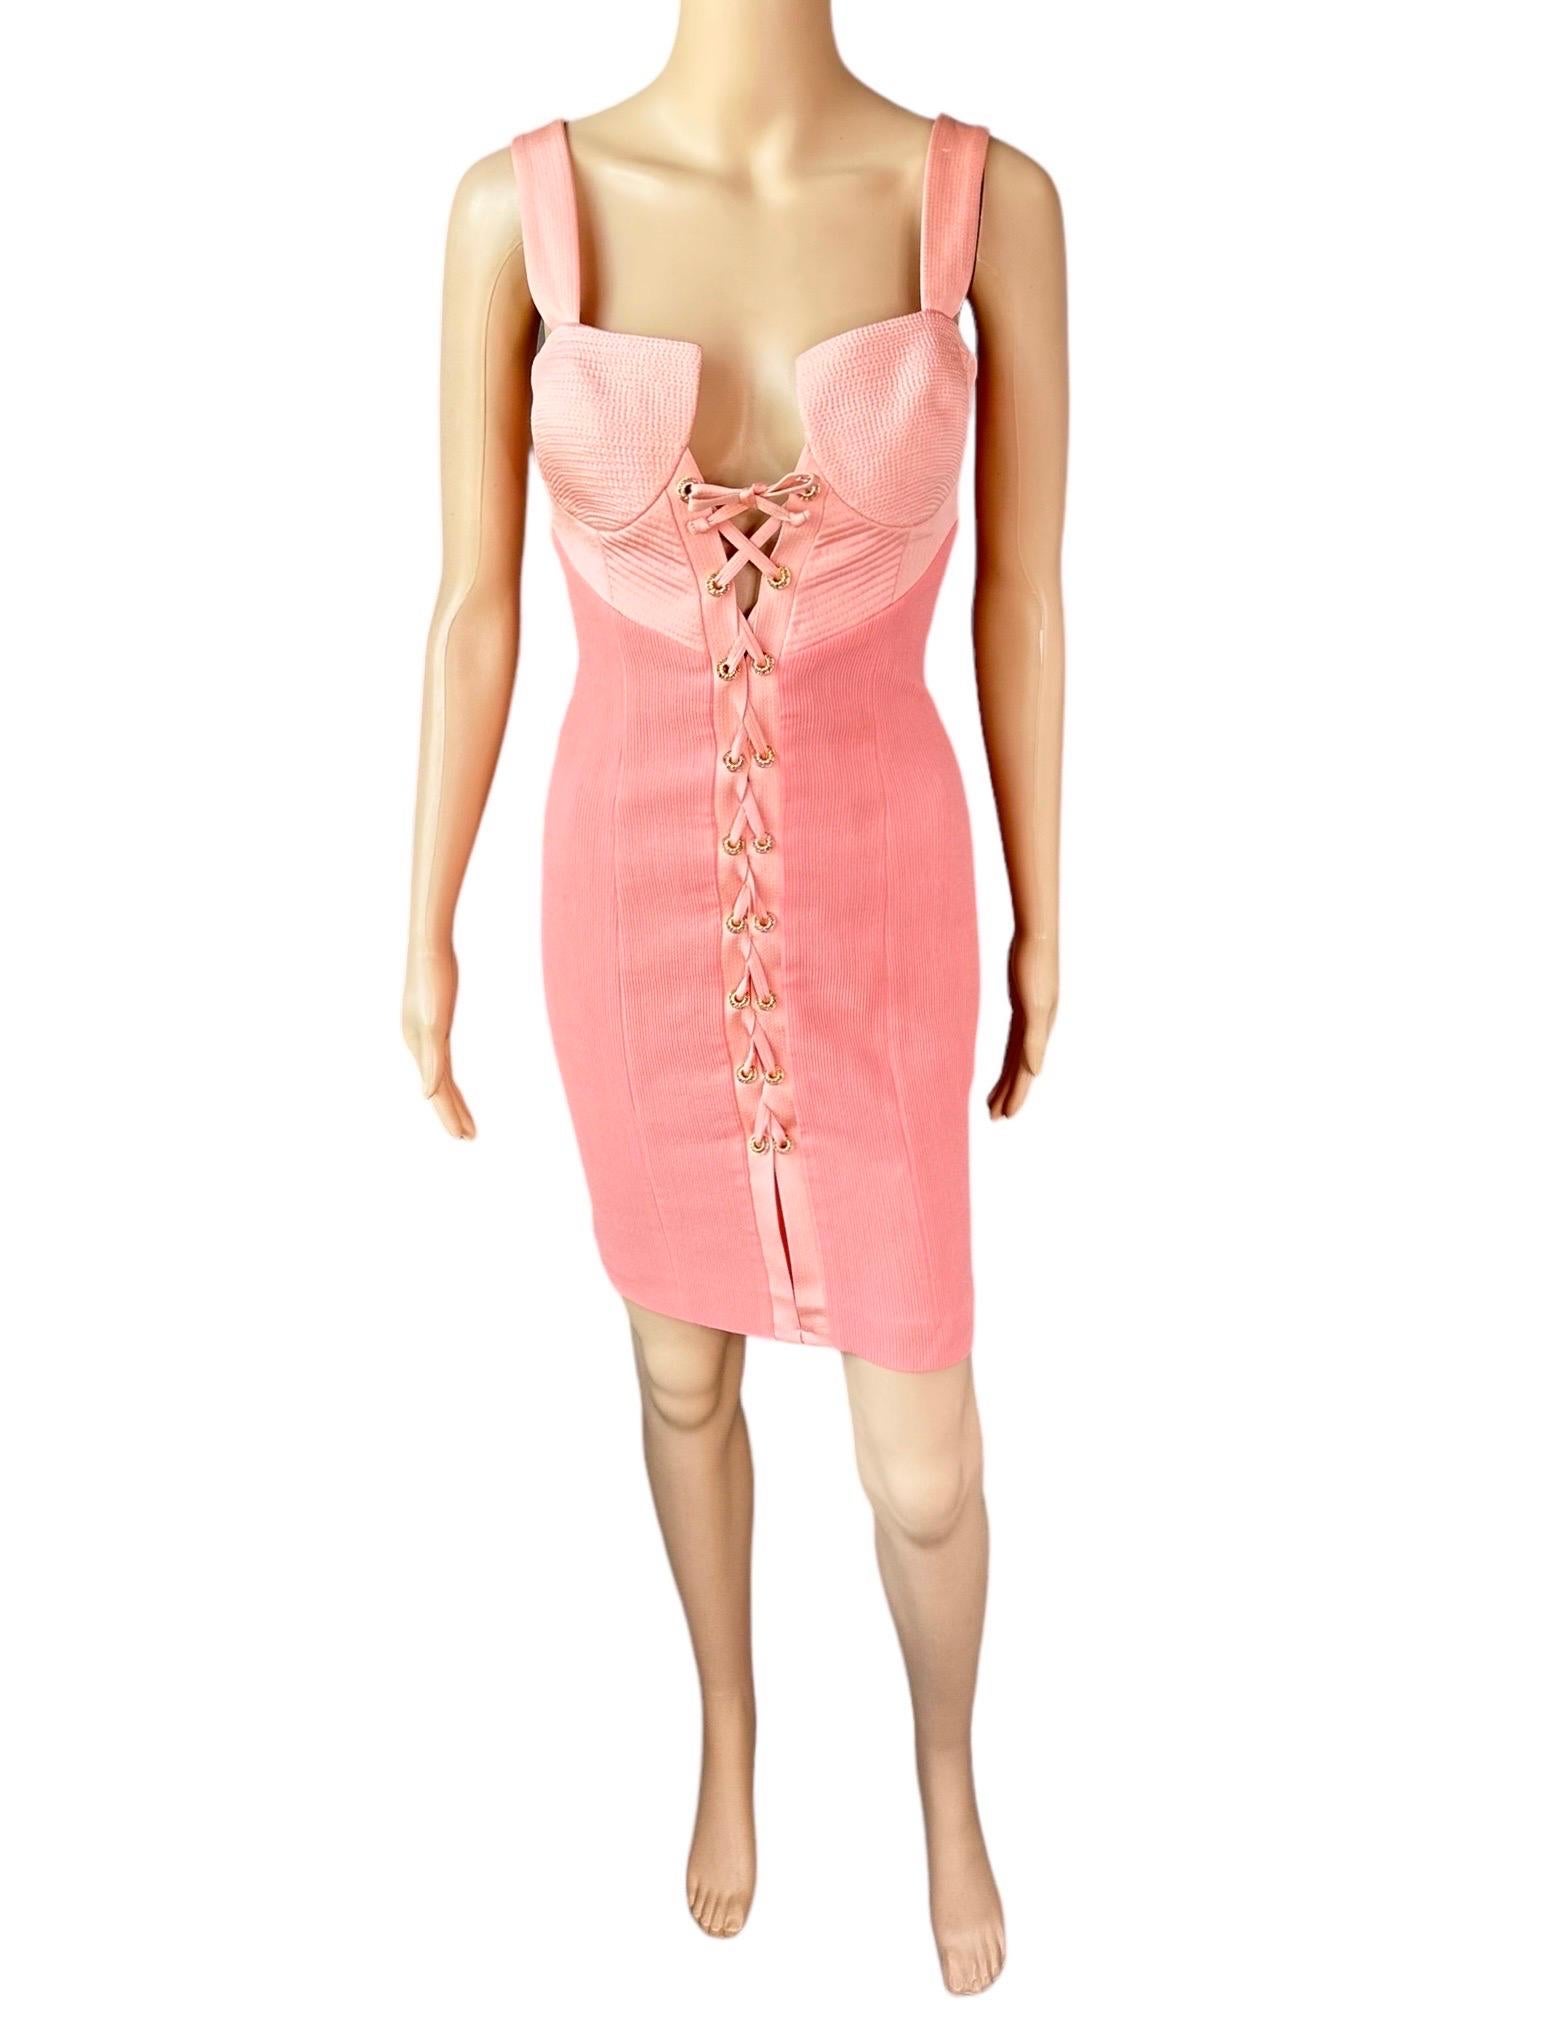 Gianni Versace S/S 1992 Couture Bustier Corset Lace Up Mini Dress For Sale 8